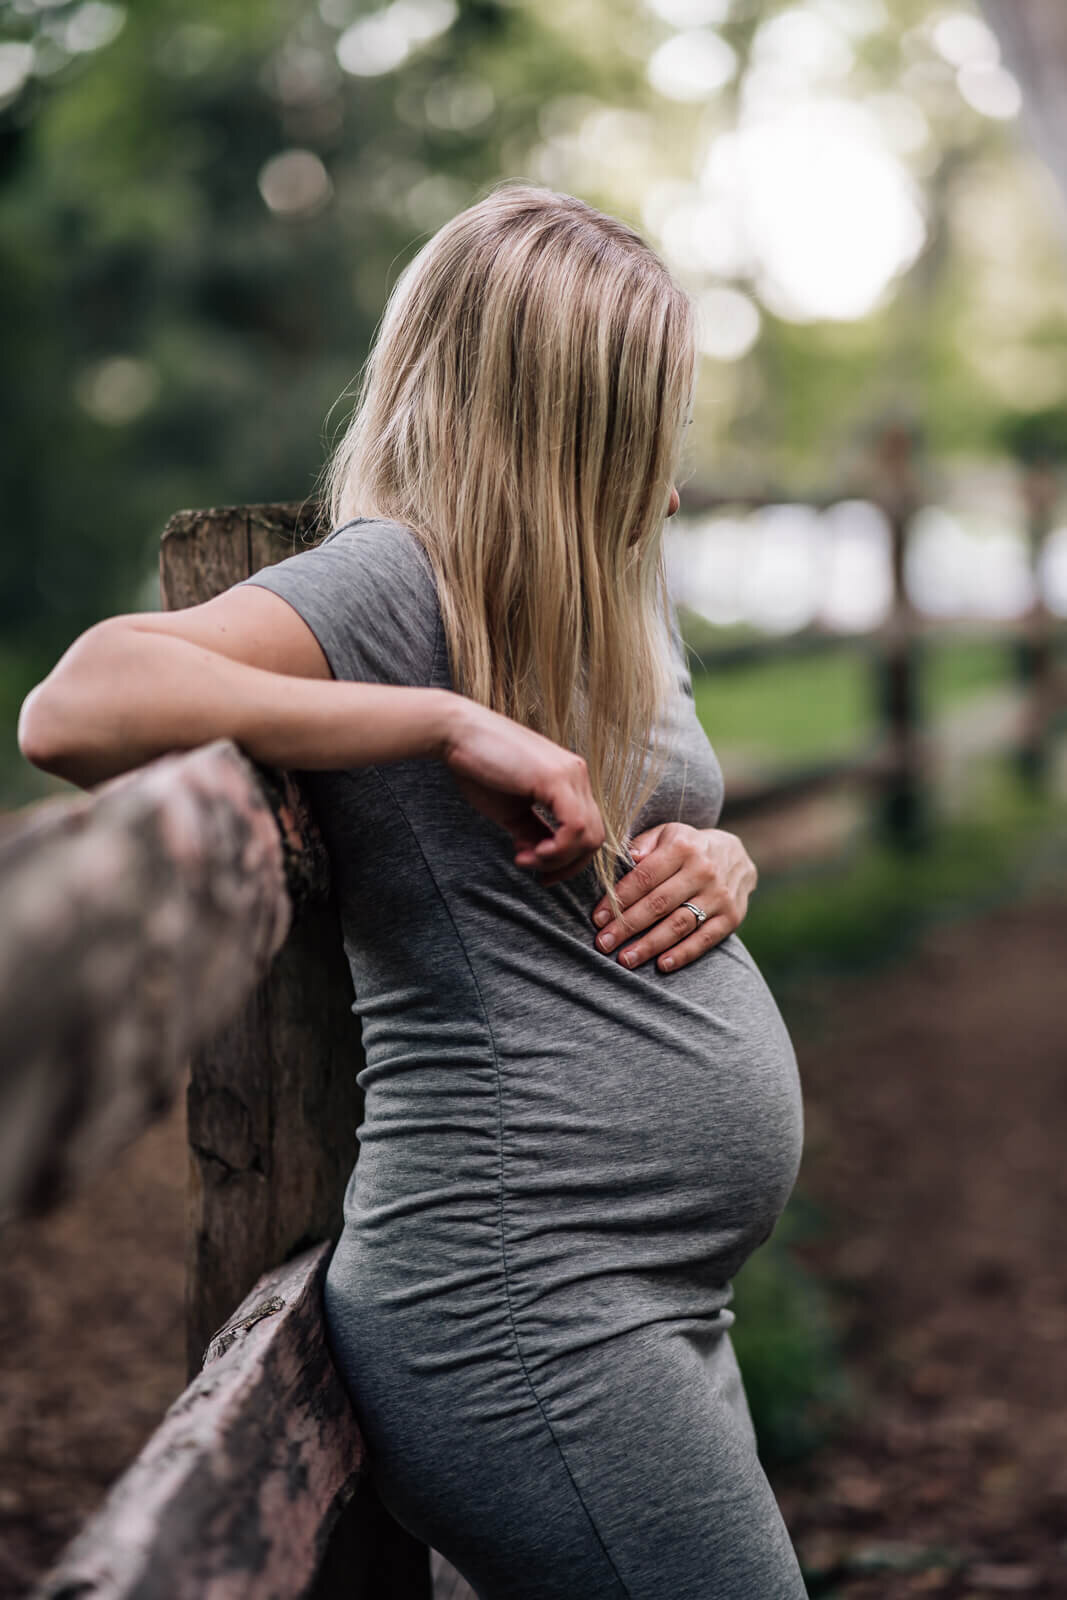 A pregnant mama, leans back on a fence and looks down towards her bump, while her long hair obscures her face.